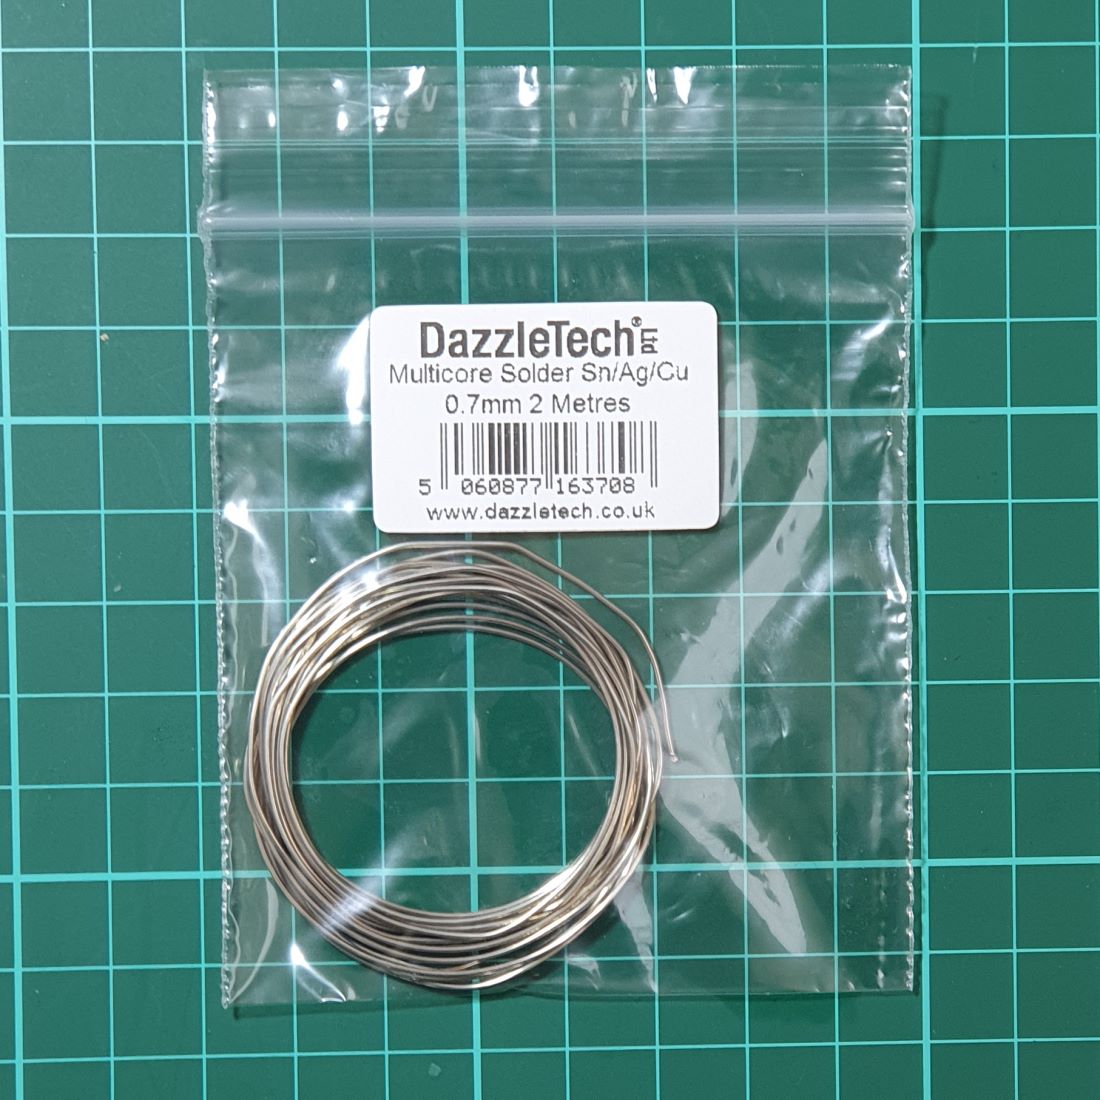 Multicore solder 0.7mm with Silver